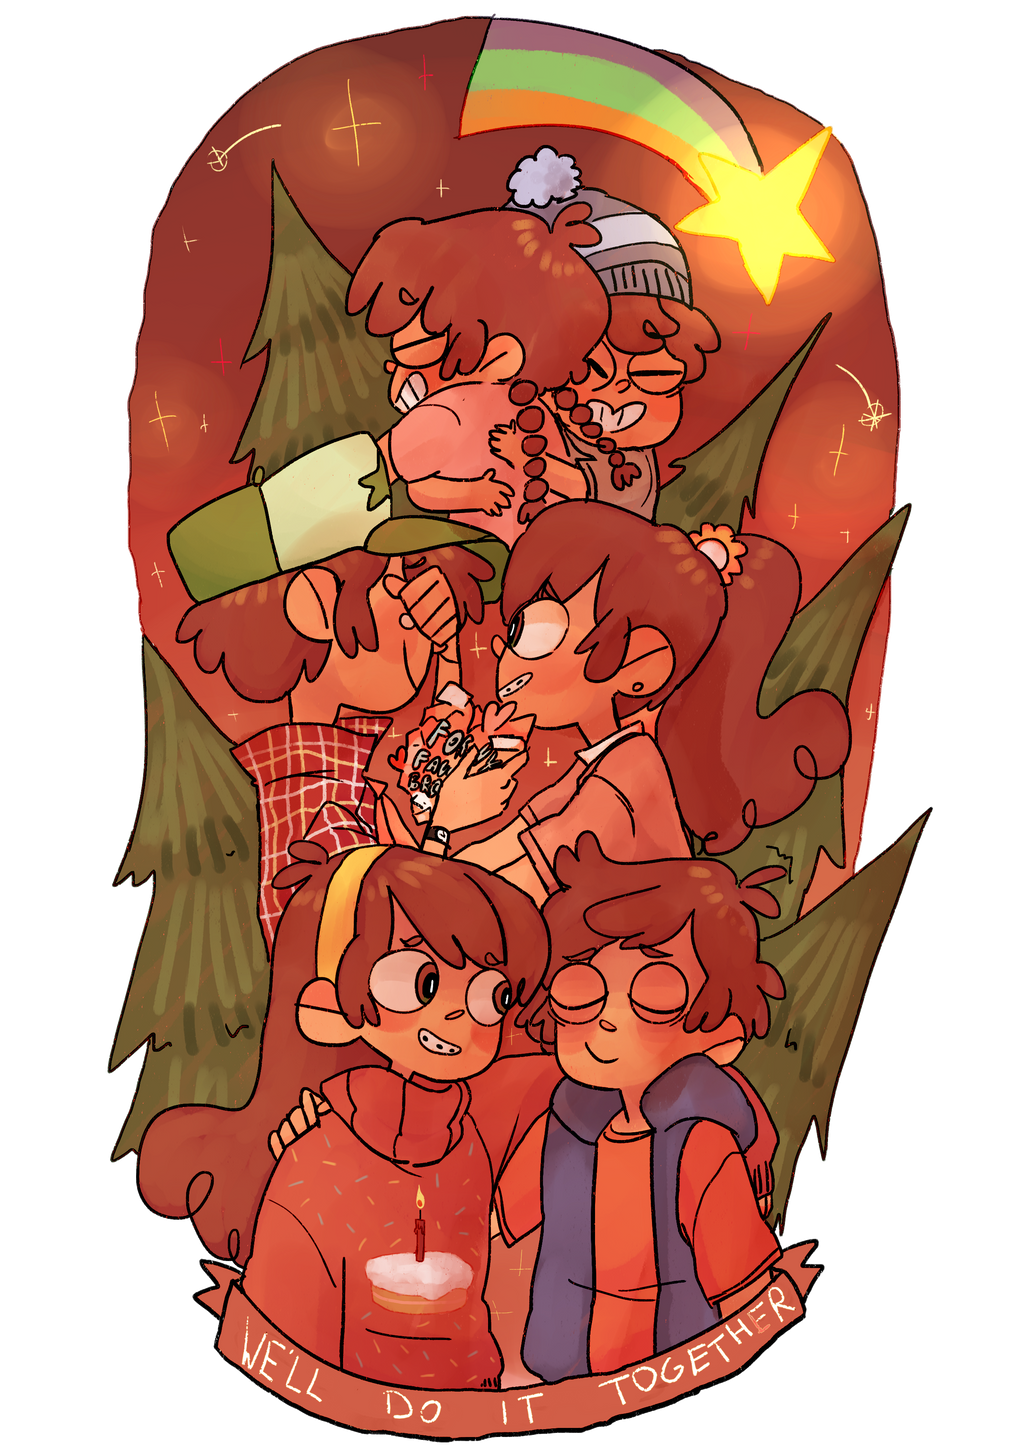 Mystery Twins